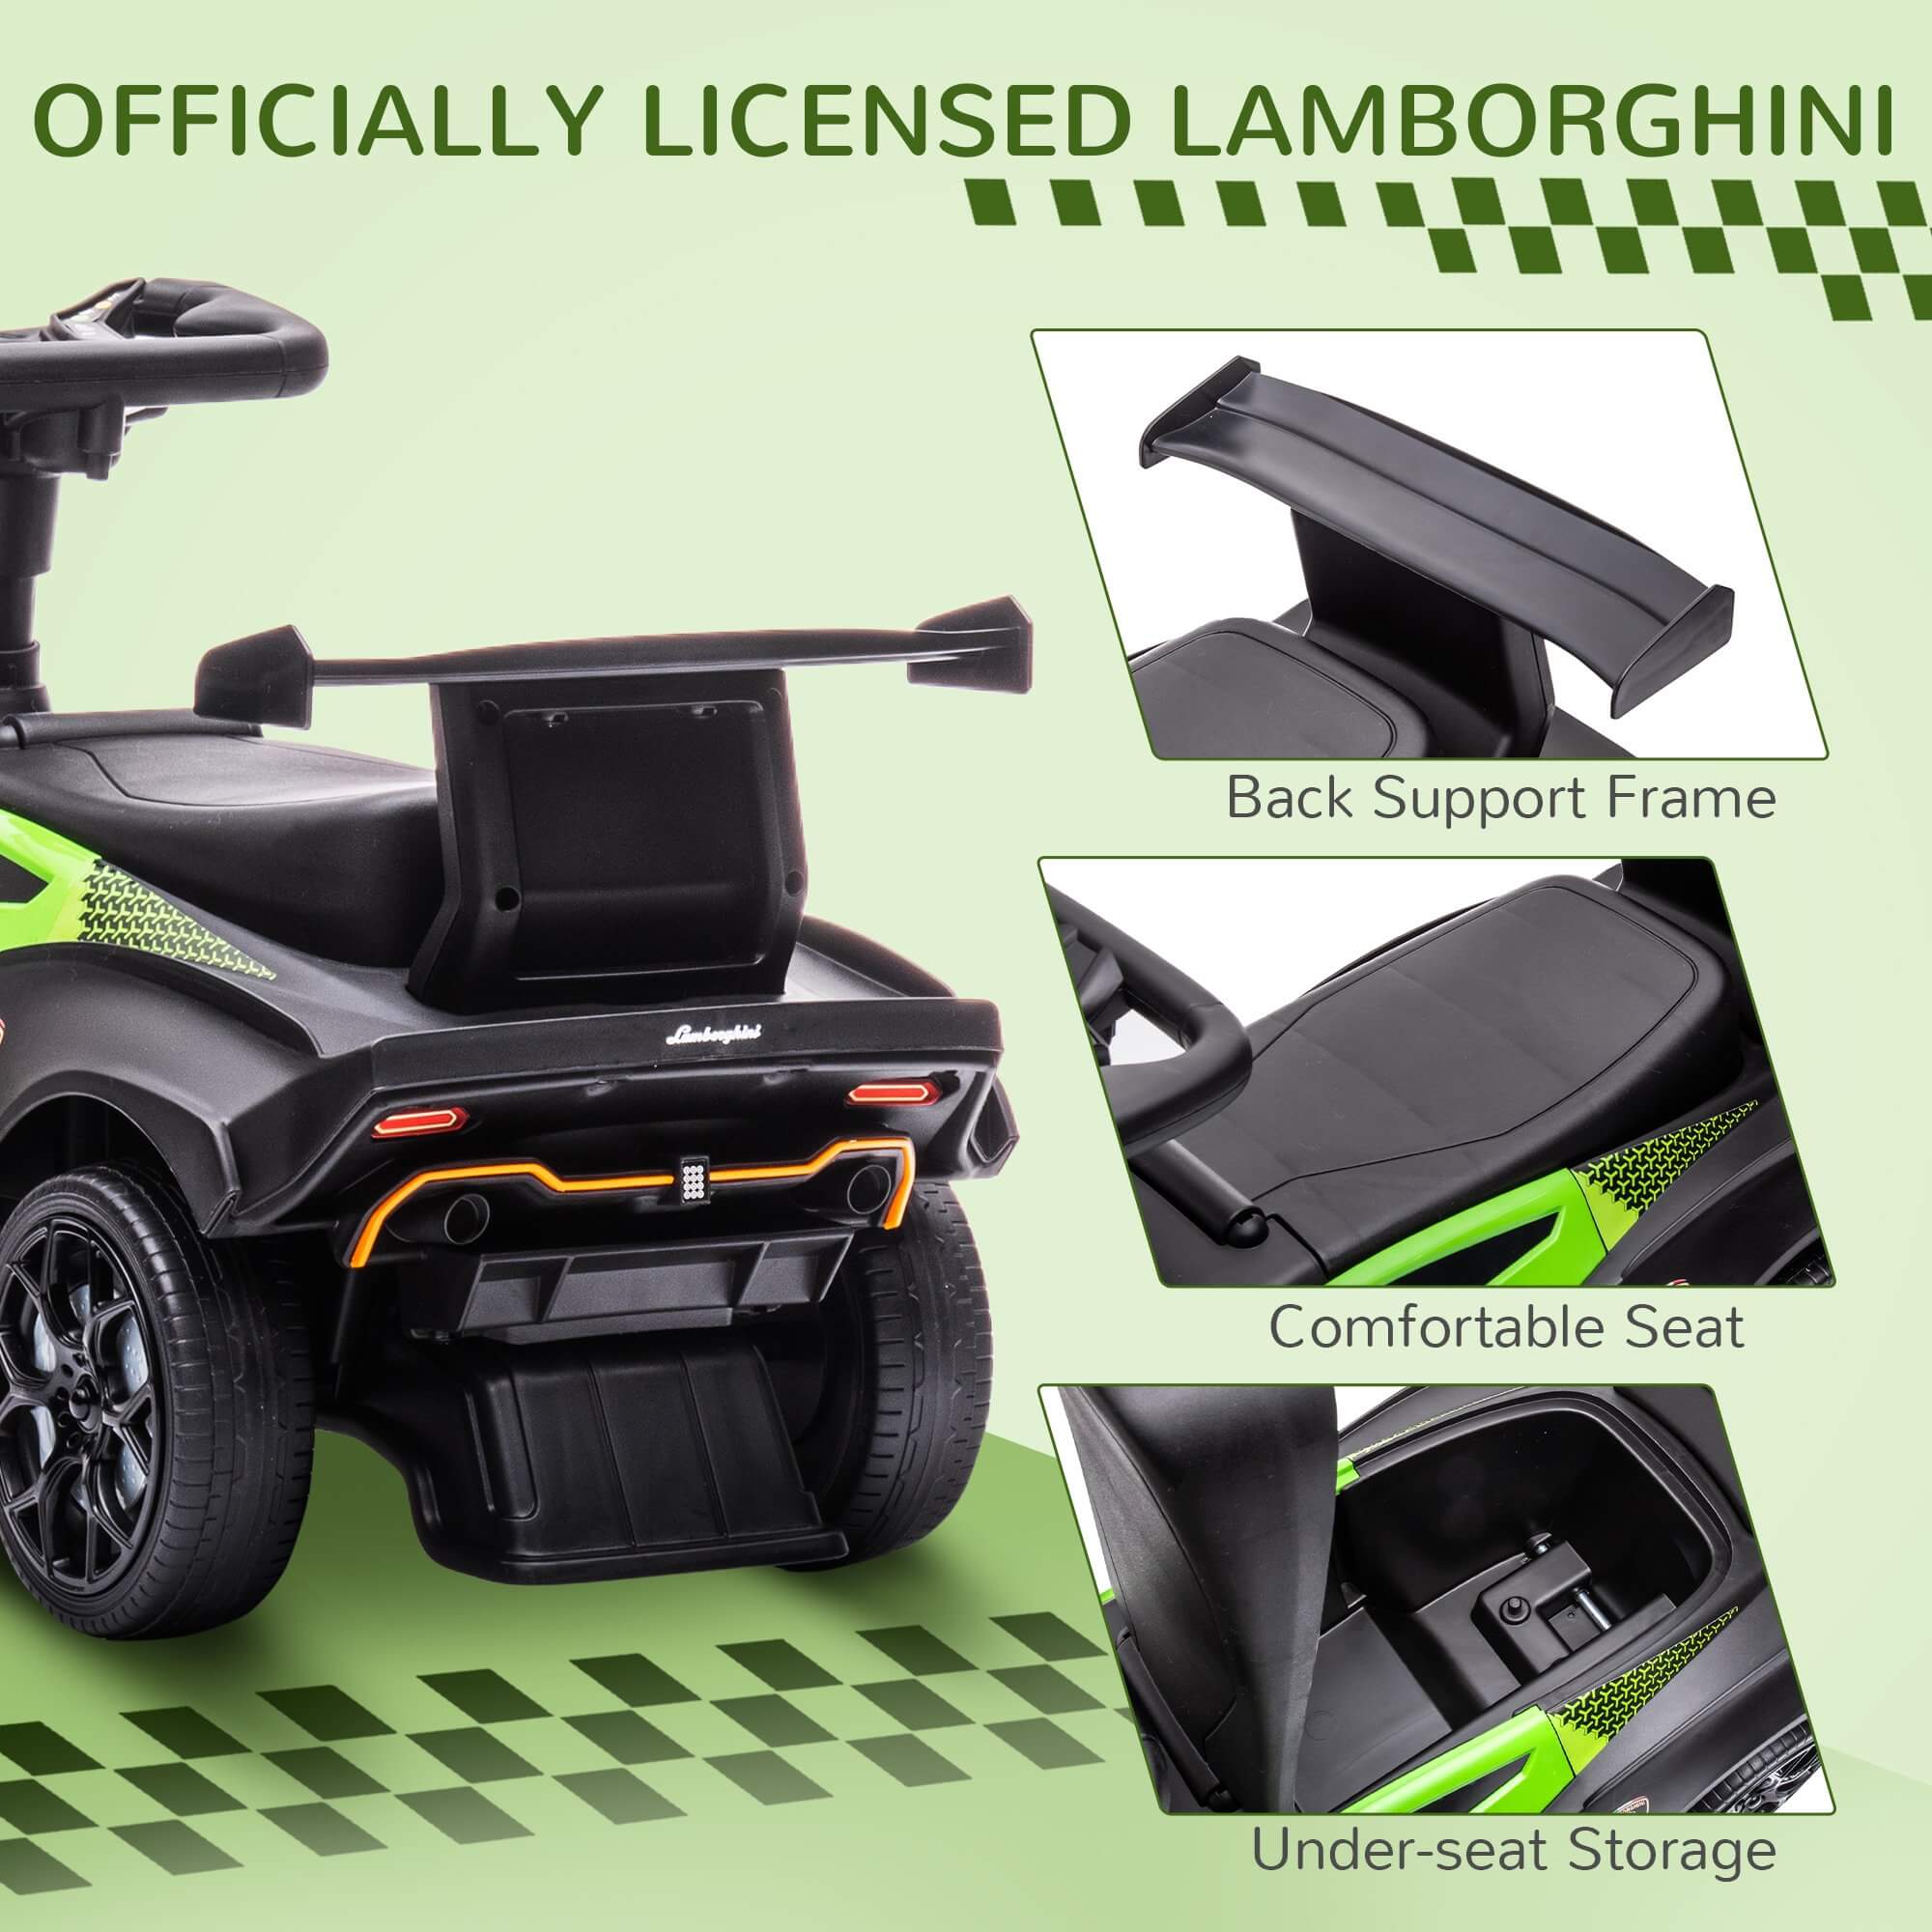 Megastar Ride on  Licensed Lamborghini Signature  Push-Along Stroller with Horn Engine Sound and Steering Wheel-Green